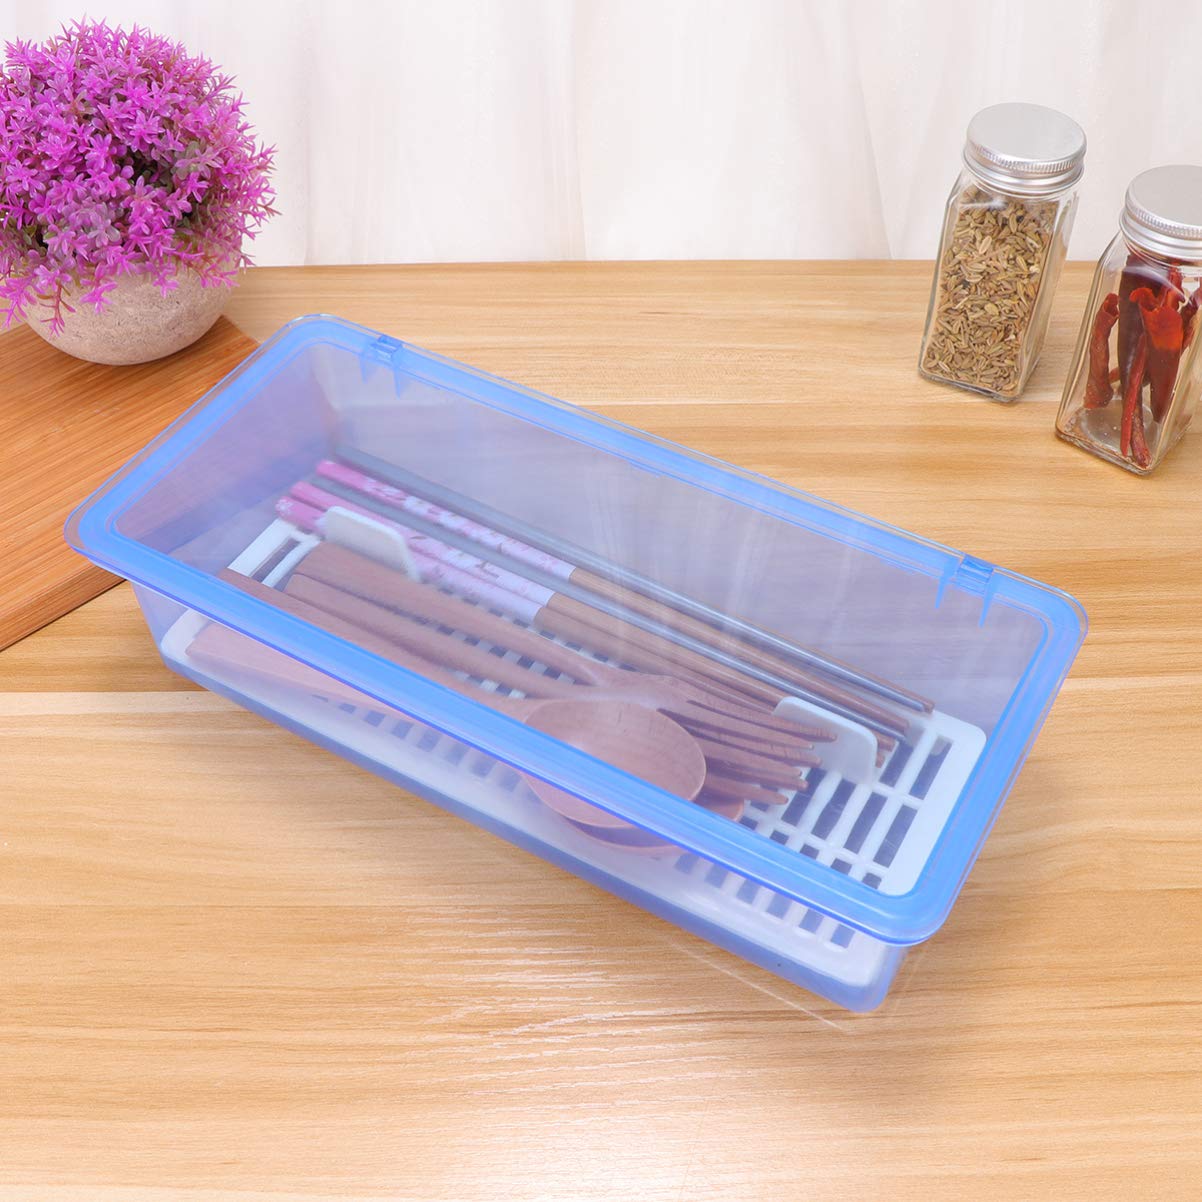 Gatuida Flatware Tray Kitchen Drawer Organizer With Lid And Drainer, Plastic Kitchen Cutlery Tray and Utensil Storage Container with Cover,- proof Dinnerware Holder